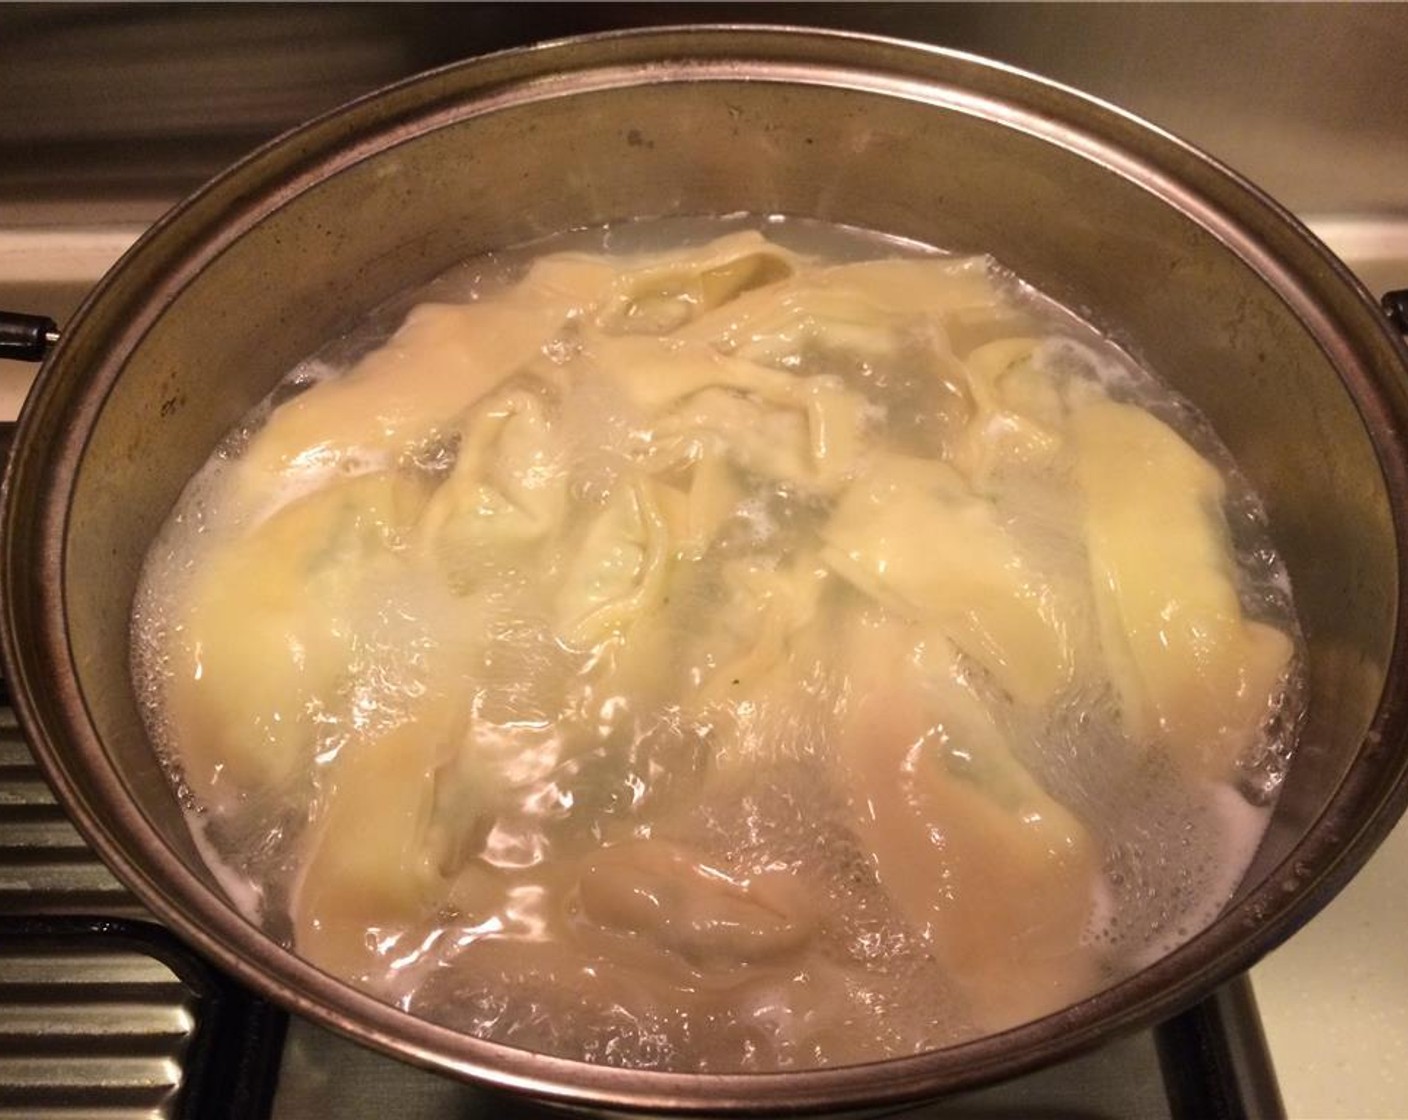 step 8 In a pot of boiling water, cook 10 dumplings for 7-10 minutes. The wanton skins will be slightly translucent and the dumplings will have floated to the top.